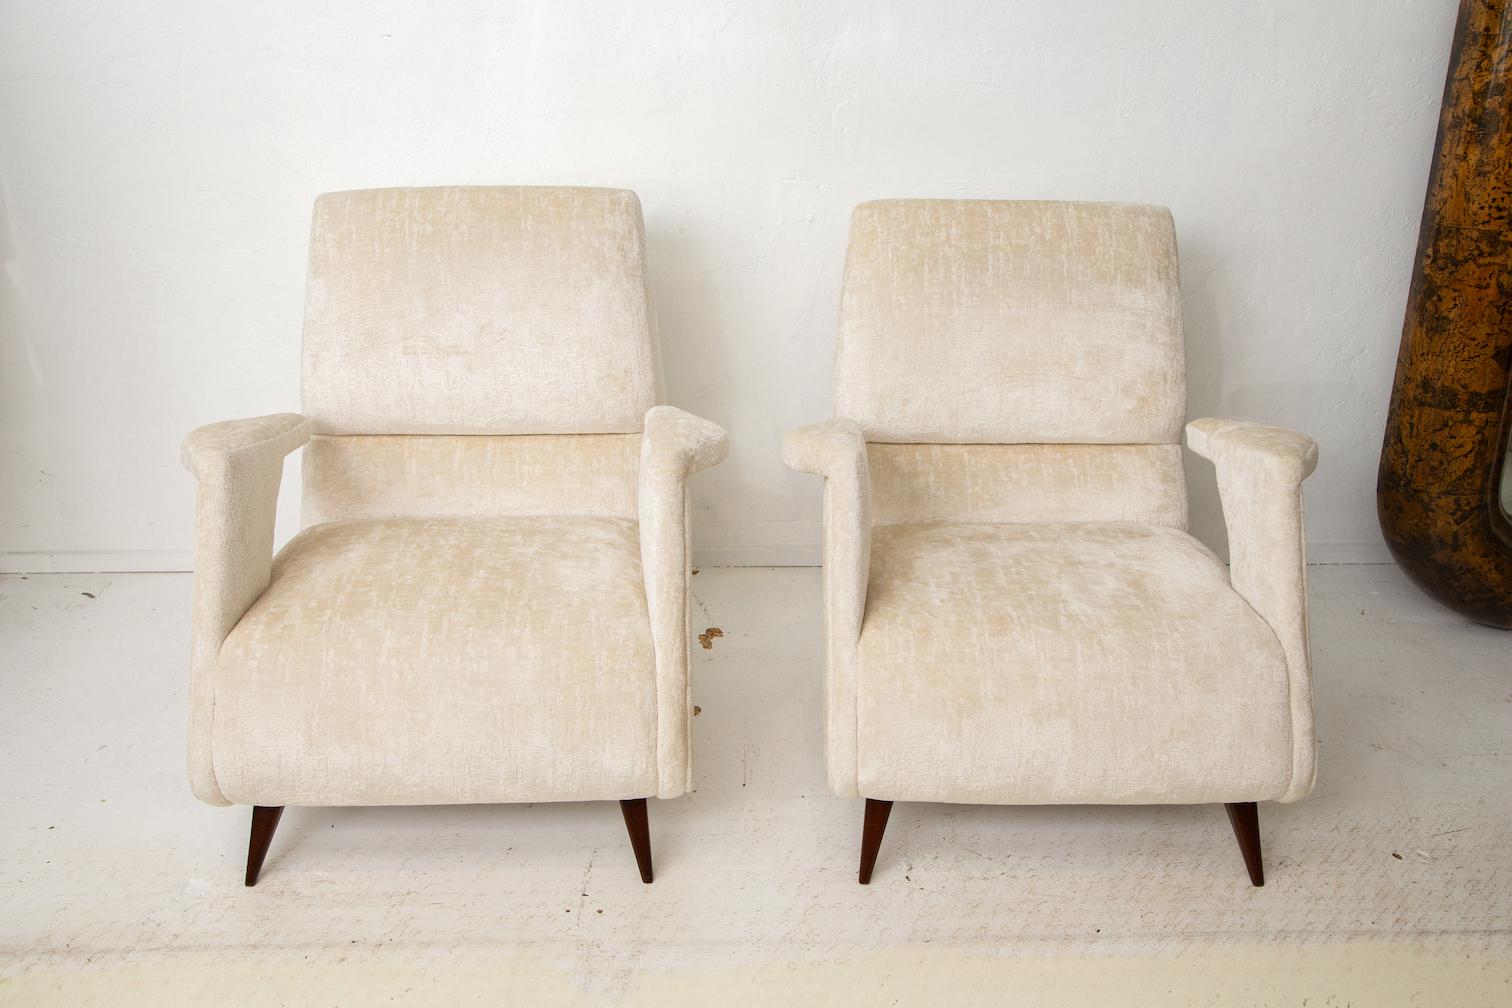 Stunning pair of mid-century Italian lounge chairs in the manner of Ico Parisi. Newly upholstered in a soft and velvety chenille.